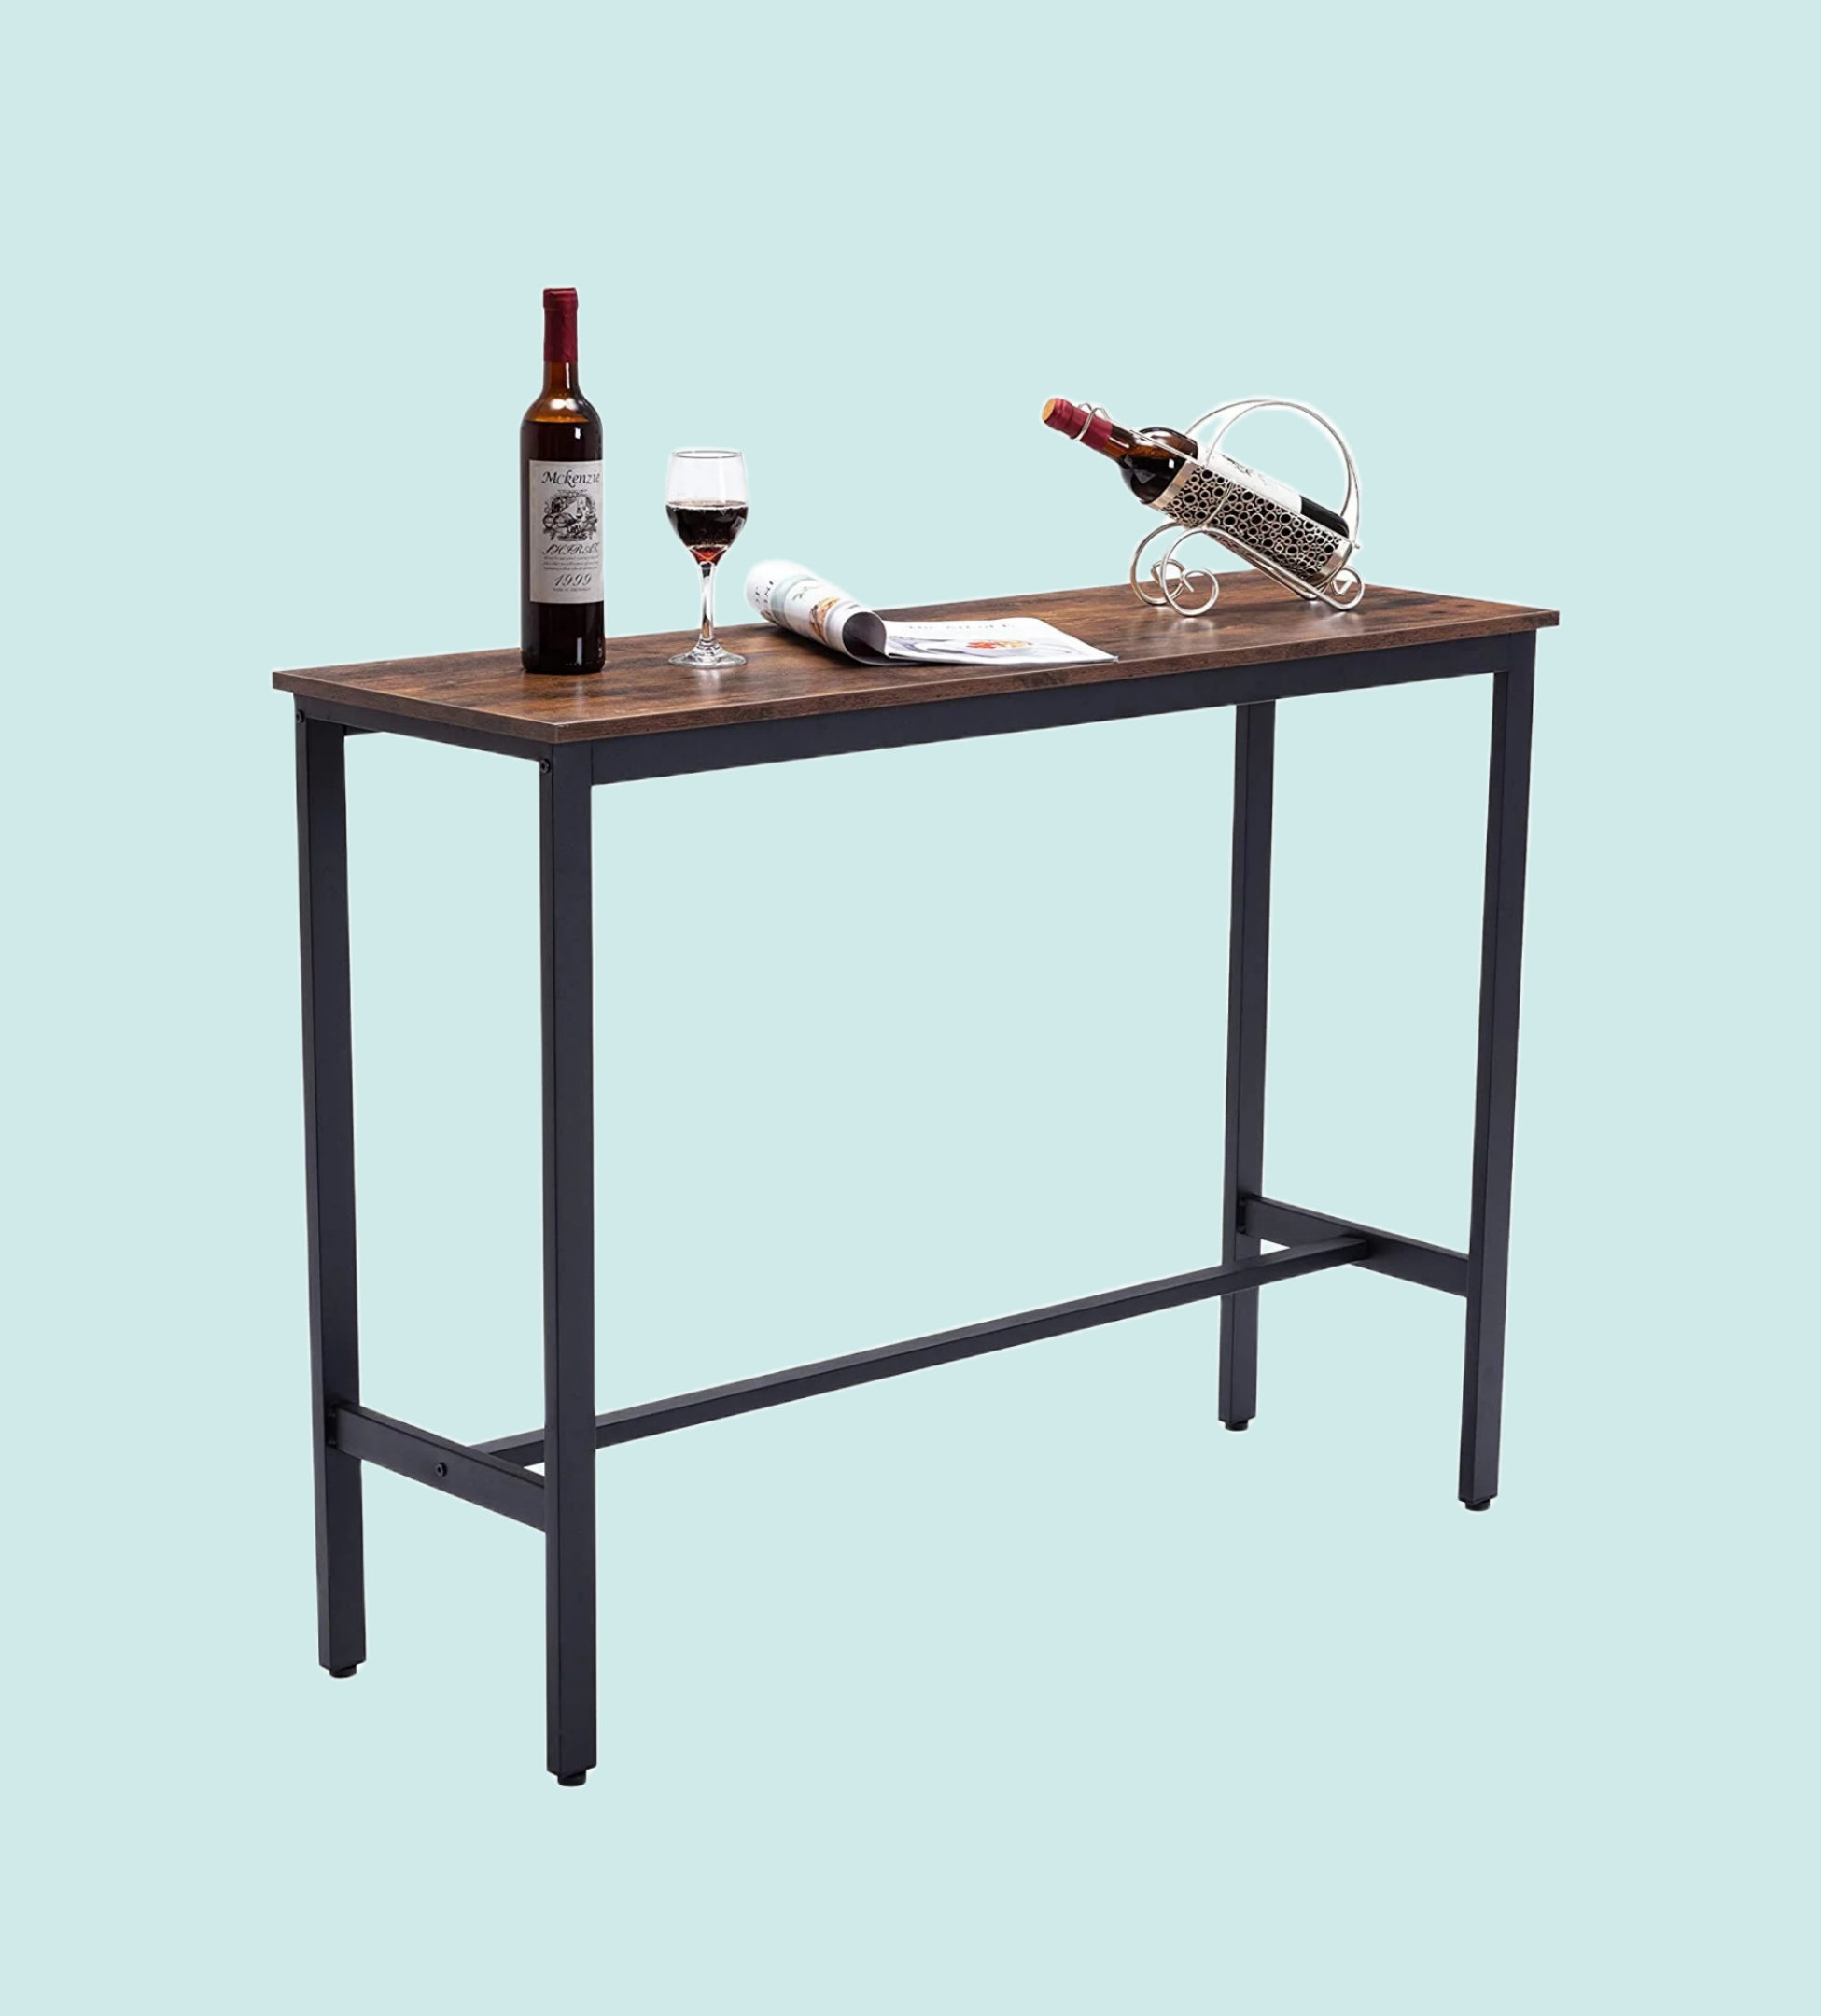 Wood Cocktail High Bar Tables Reception Desk Counter Club Wine Long Bar  Tables Alcohol Industrial Mesa